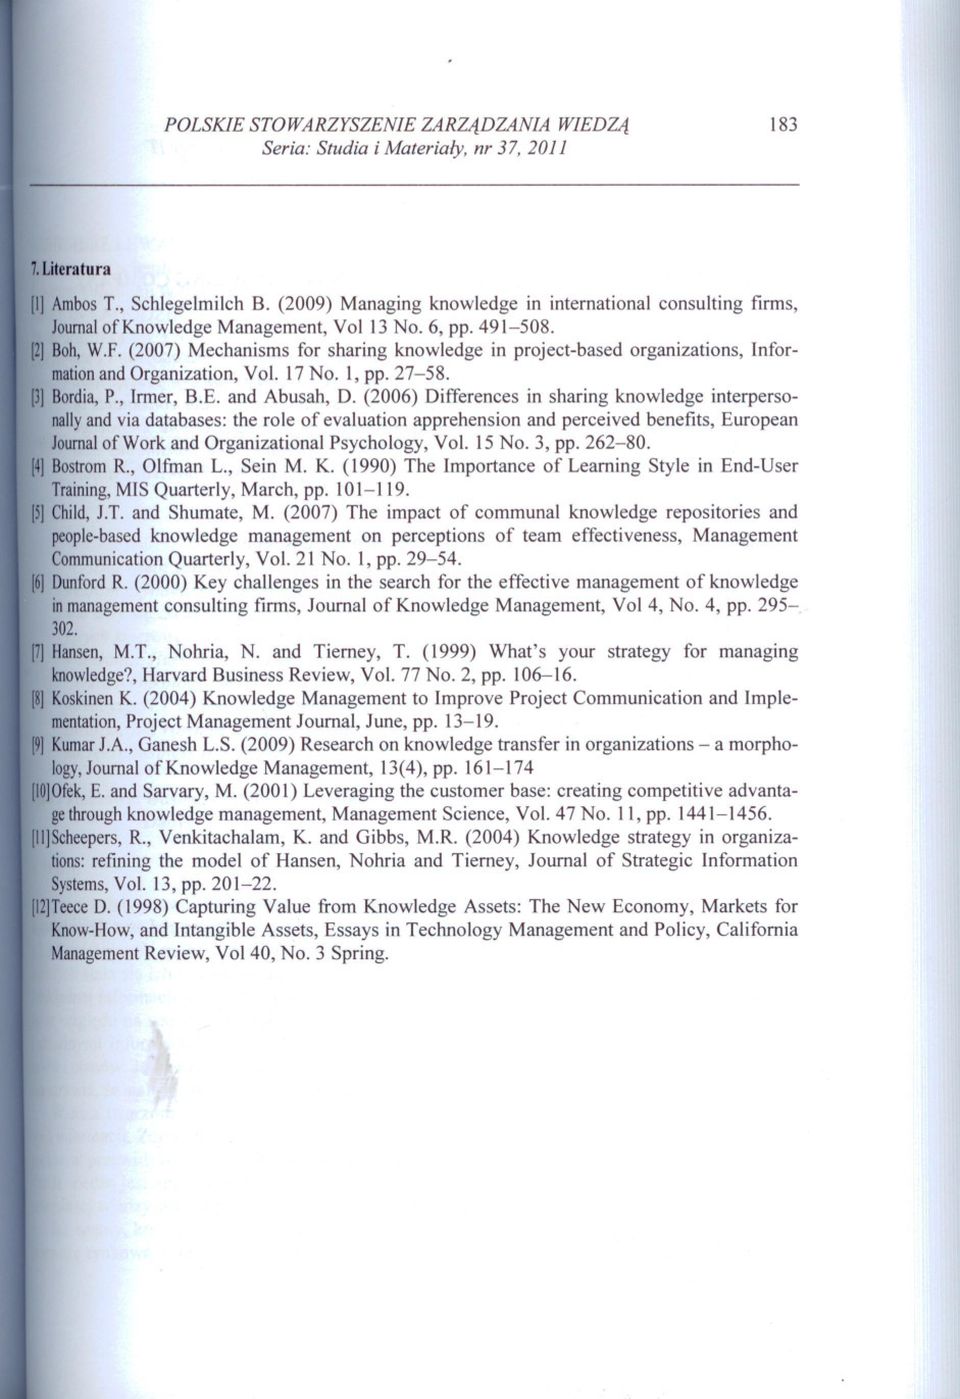 (2007) Mechanisms for sharing knowledge in project-based organizations, Informationand Organization, Vol. 17 No. I, pp. 27-58. [3] Bordia, P., Inner, B.E. and Abusah, D.